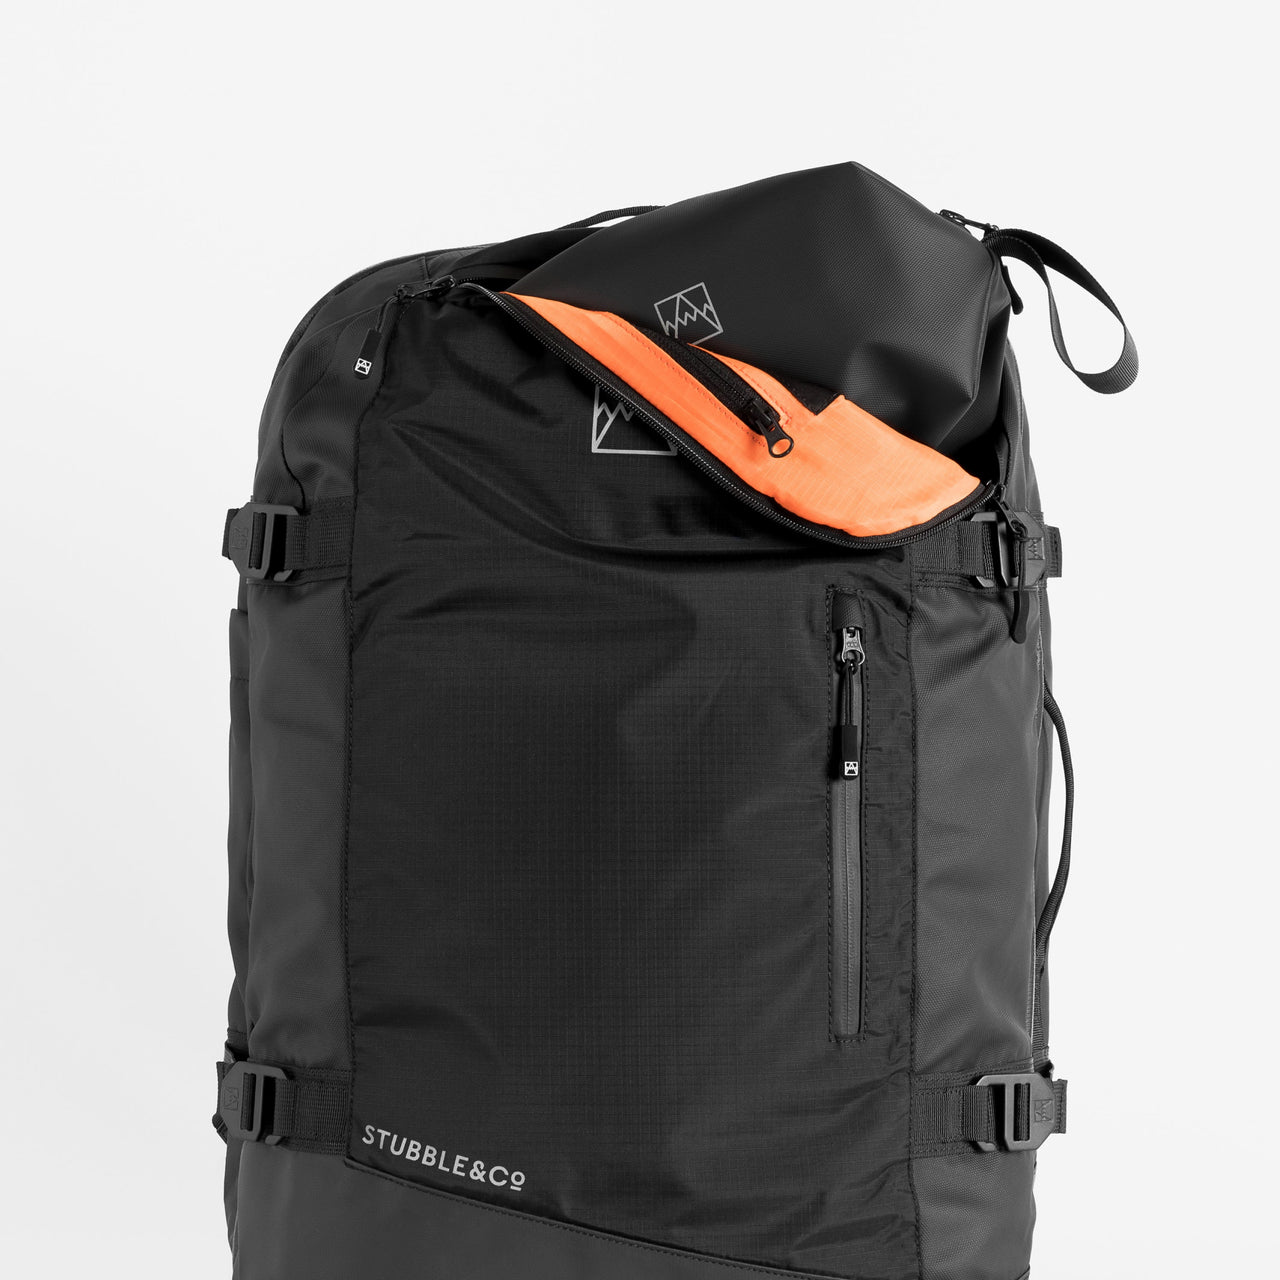 Adventure Bag in All Black front view with top pocket open